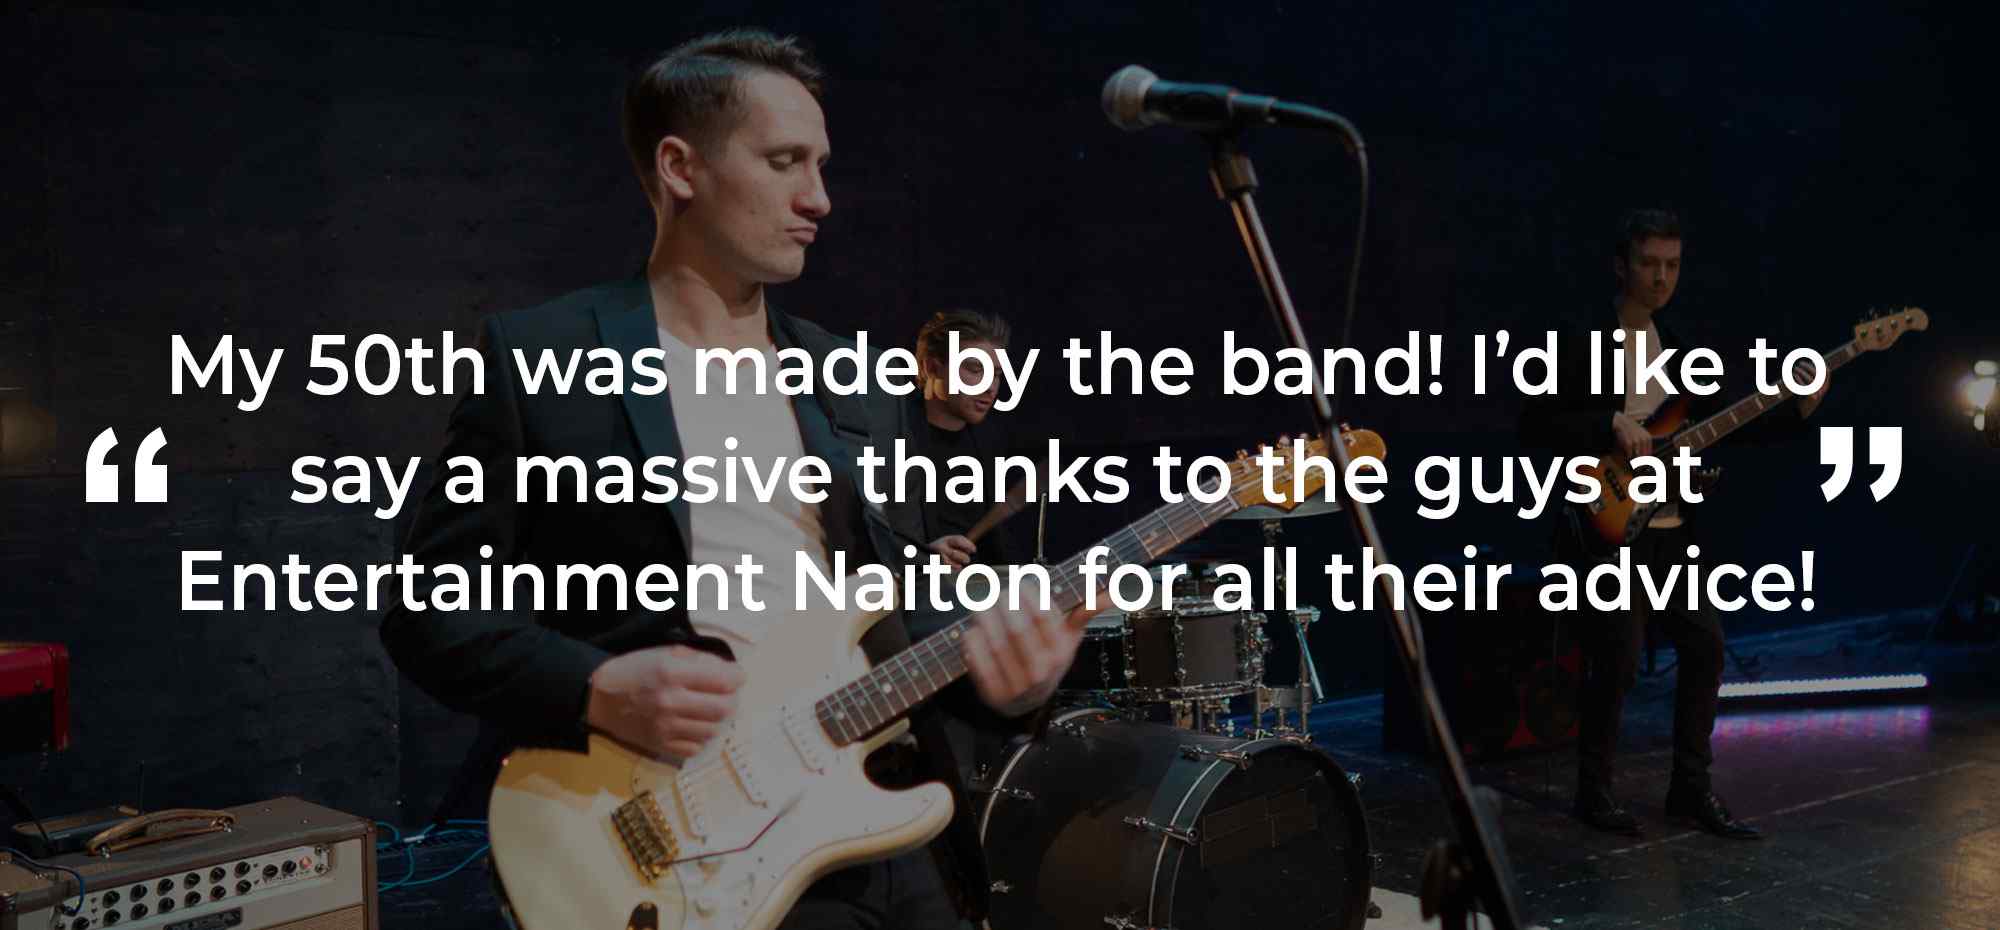 Client Review of a Party Band West Midlands